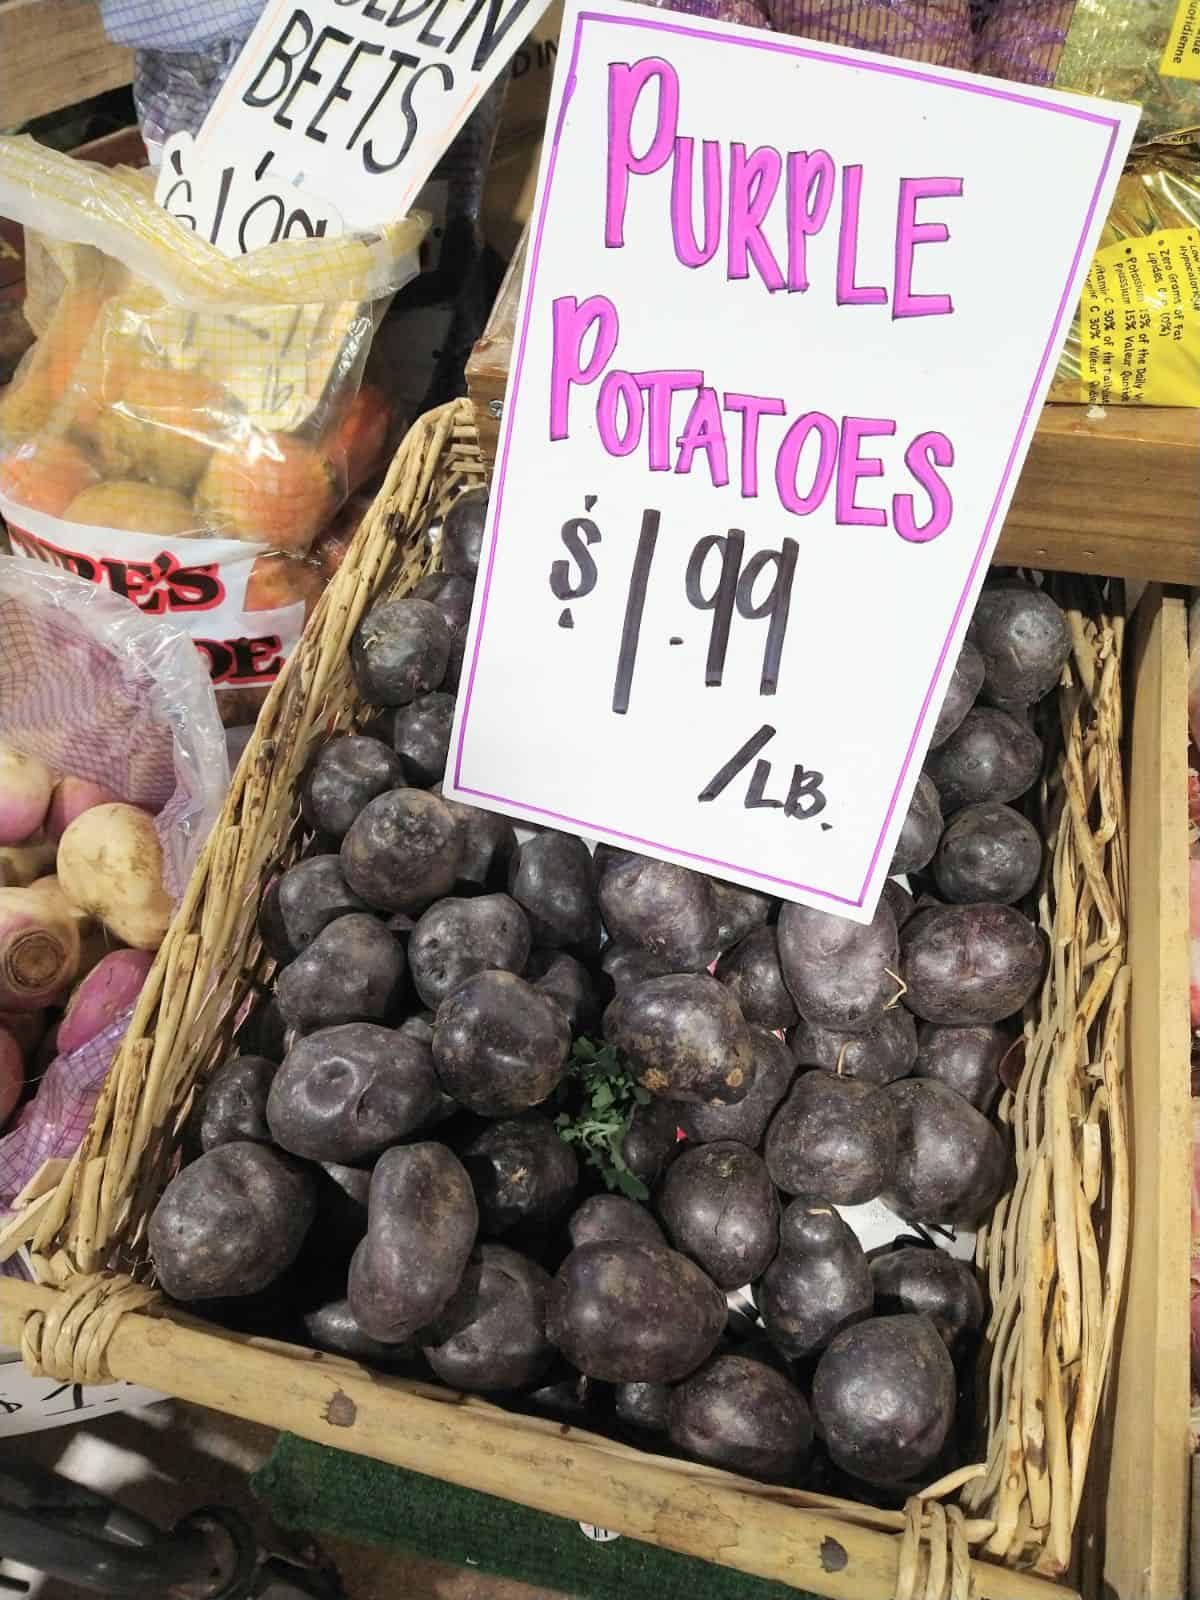 Purple potatoes in basket with a sign saying they are $1.99 a pound.